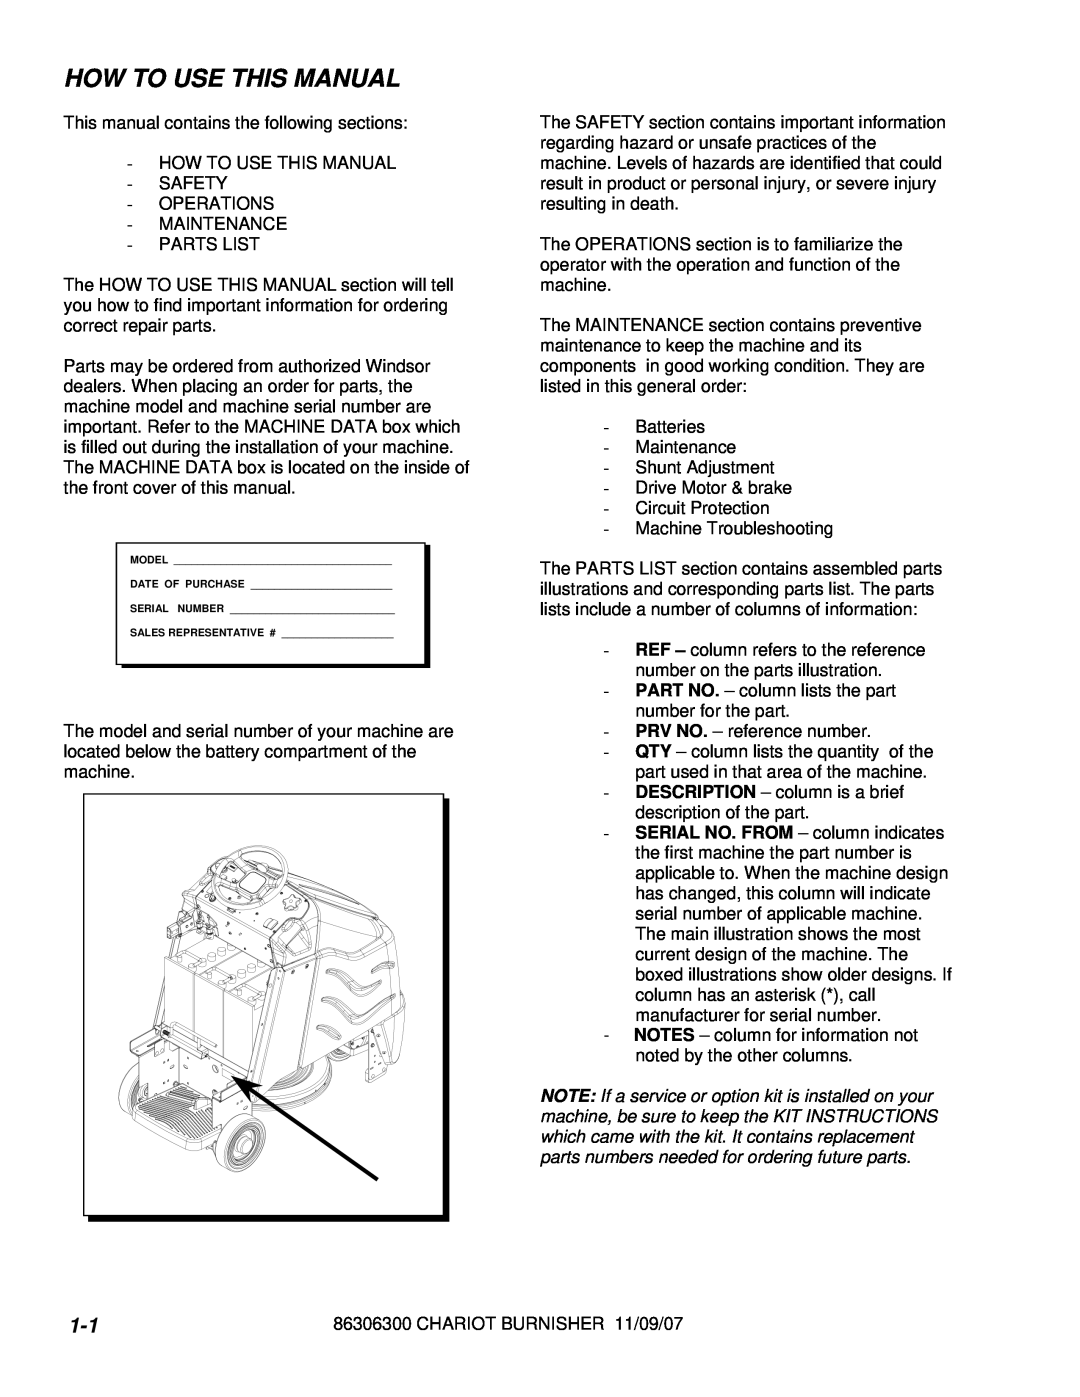 Windsor CBCD20, CBE20, CB20 manual How To Use This Manual, The PARTS LIST section contains assembled parts 